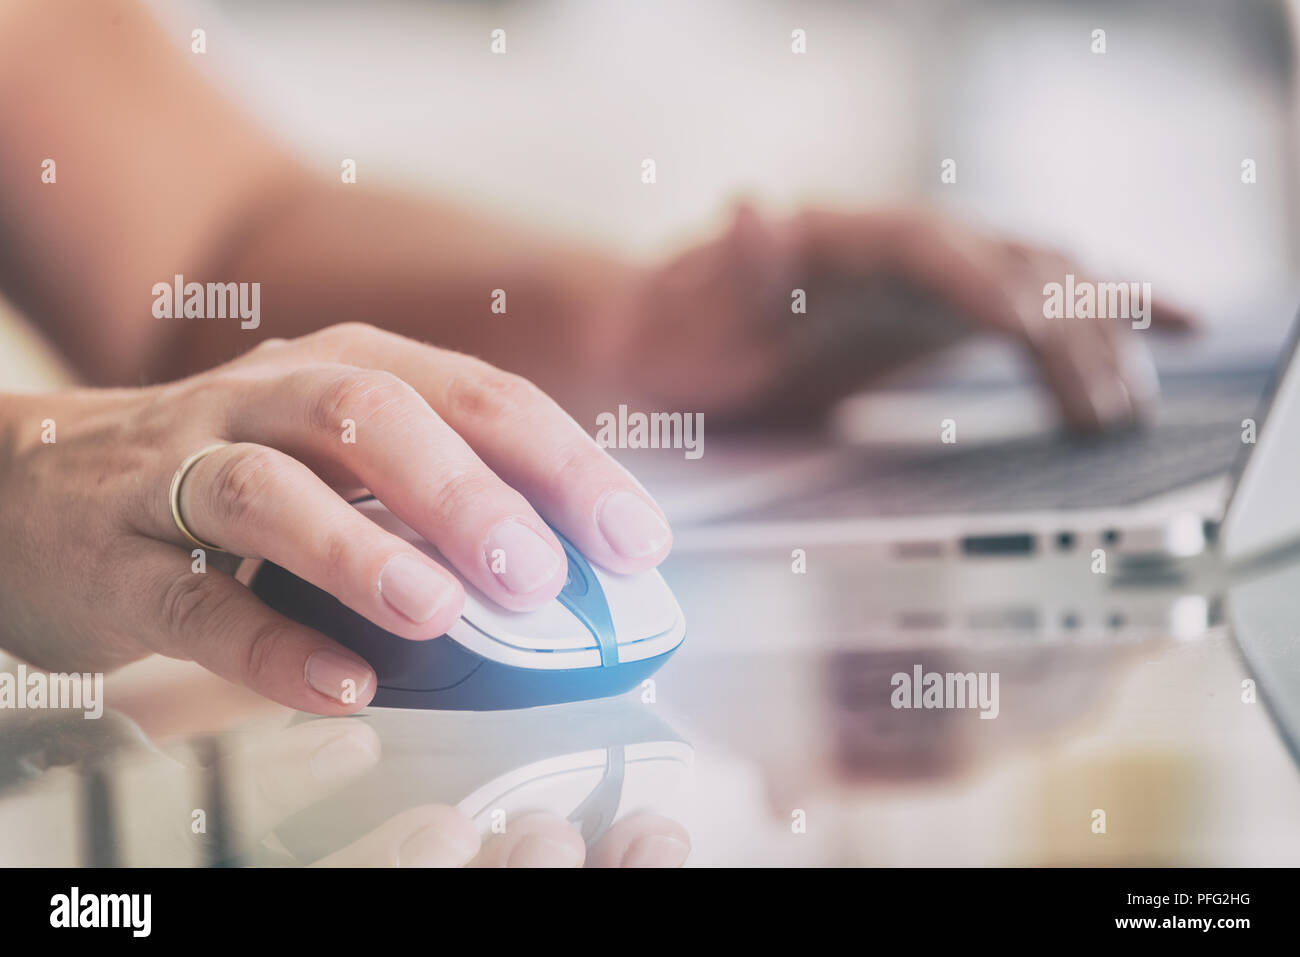 Woman working at home office using laptop, computer mouse in a foreground Stock Photo